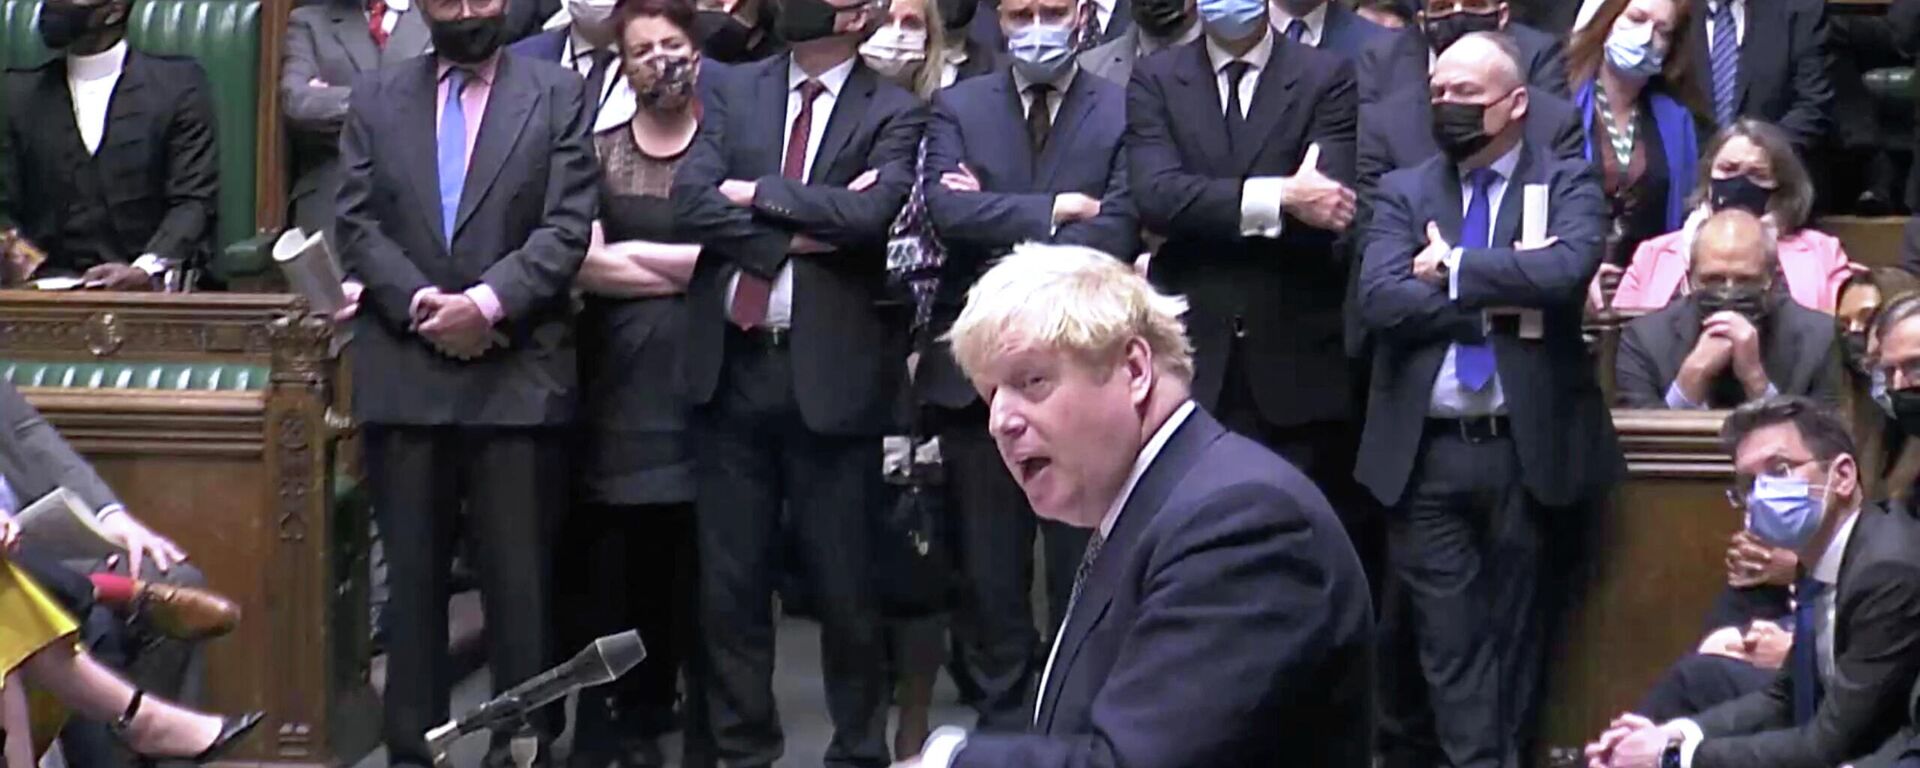 British Prime Minister Boris Johnson speaks during the weekly question time debate at Parliament in London, Britain, January 12, 2022 - Sputnik International, 1920, 19.01.2022